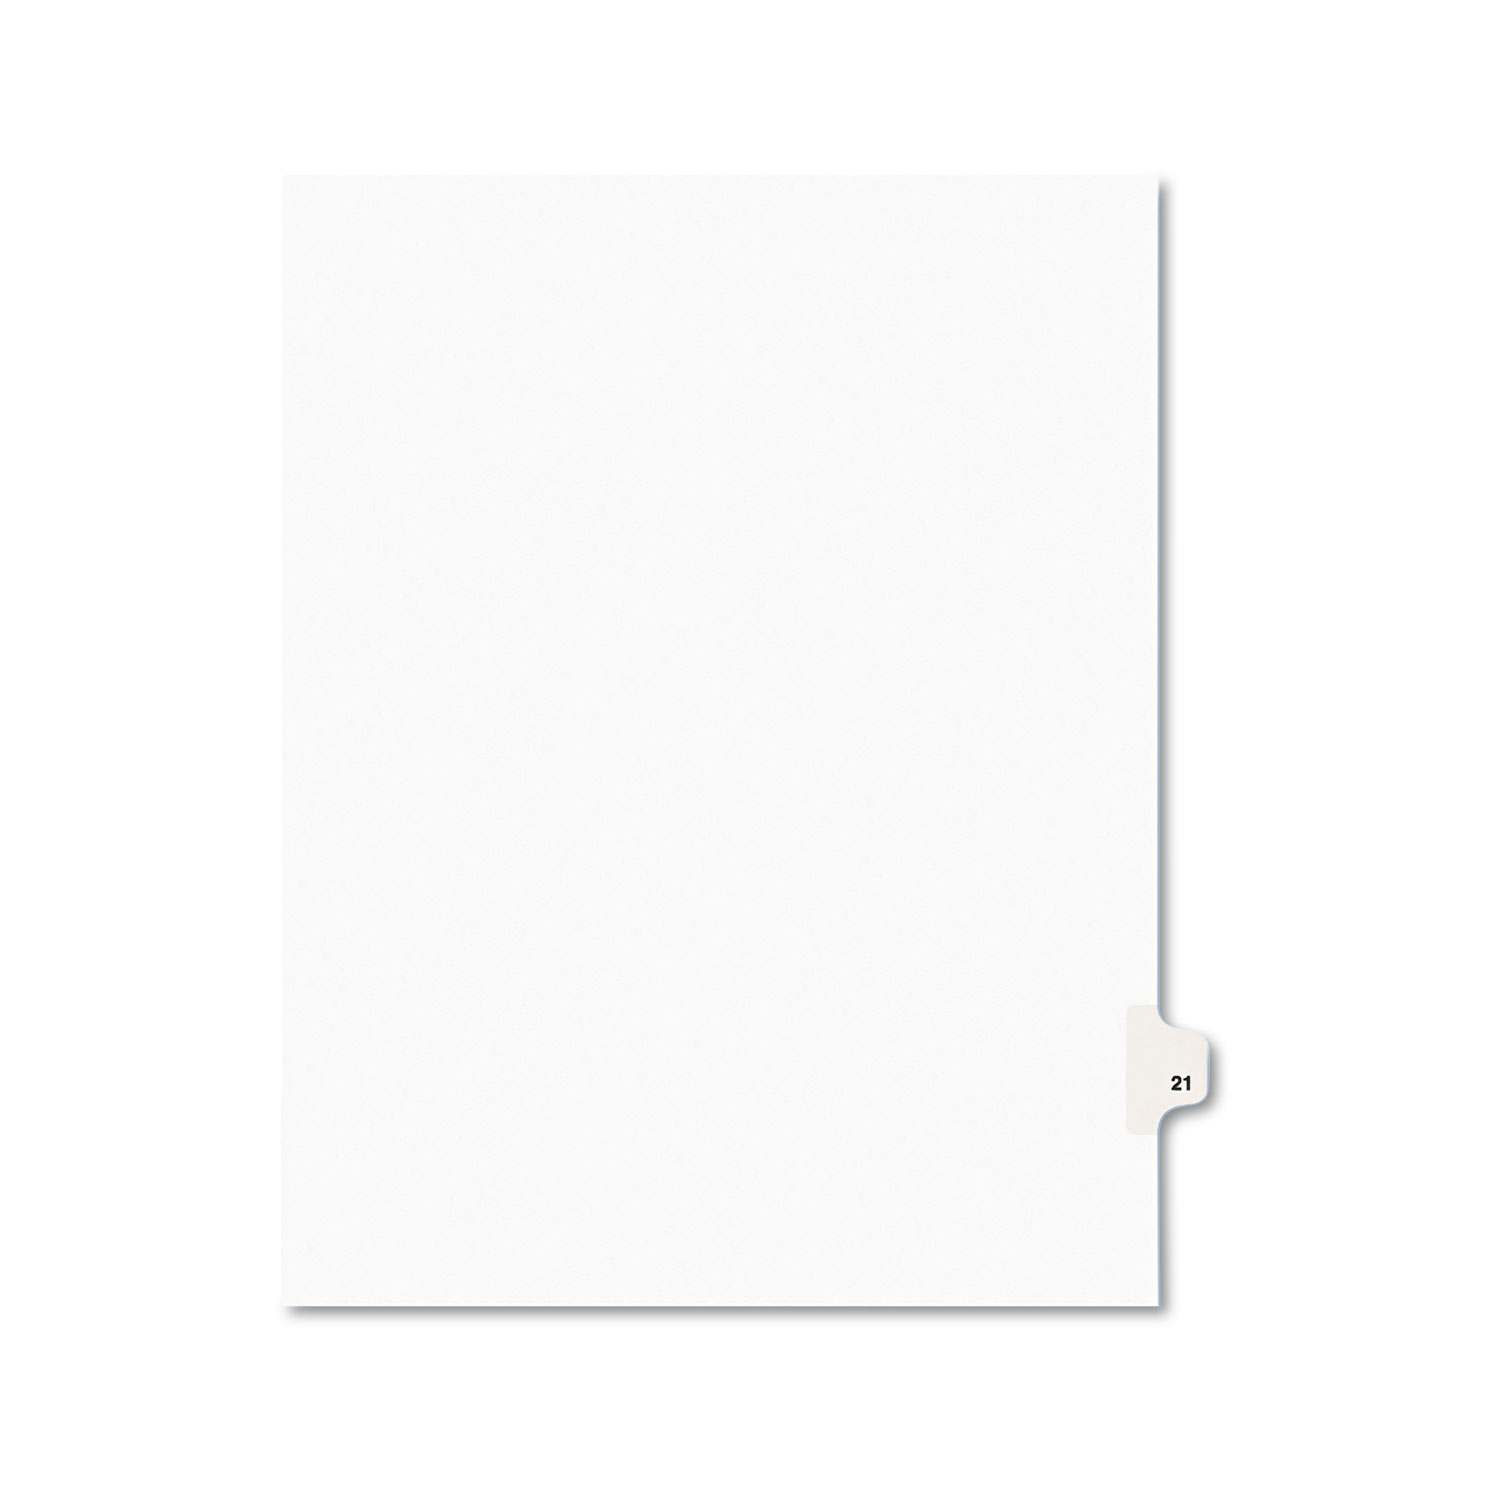  Avery 01021 Preprinted Legal Exhibit Side Tab Index Dividers, Avery Style, 10-Tab, 21, 11 x 8.5, White, 25/Pack (AVE01021) 